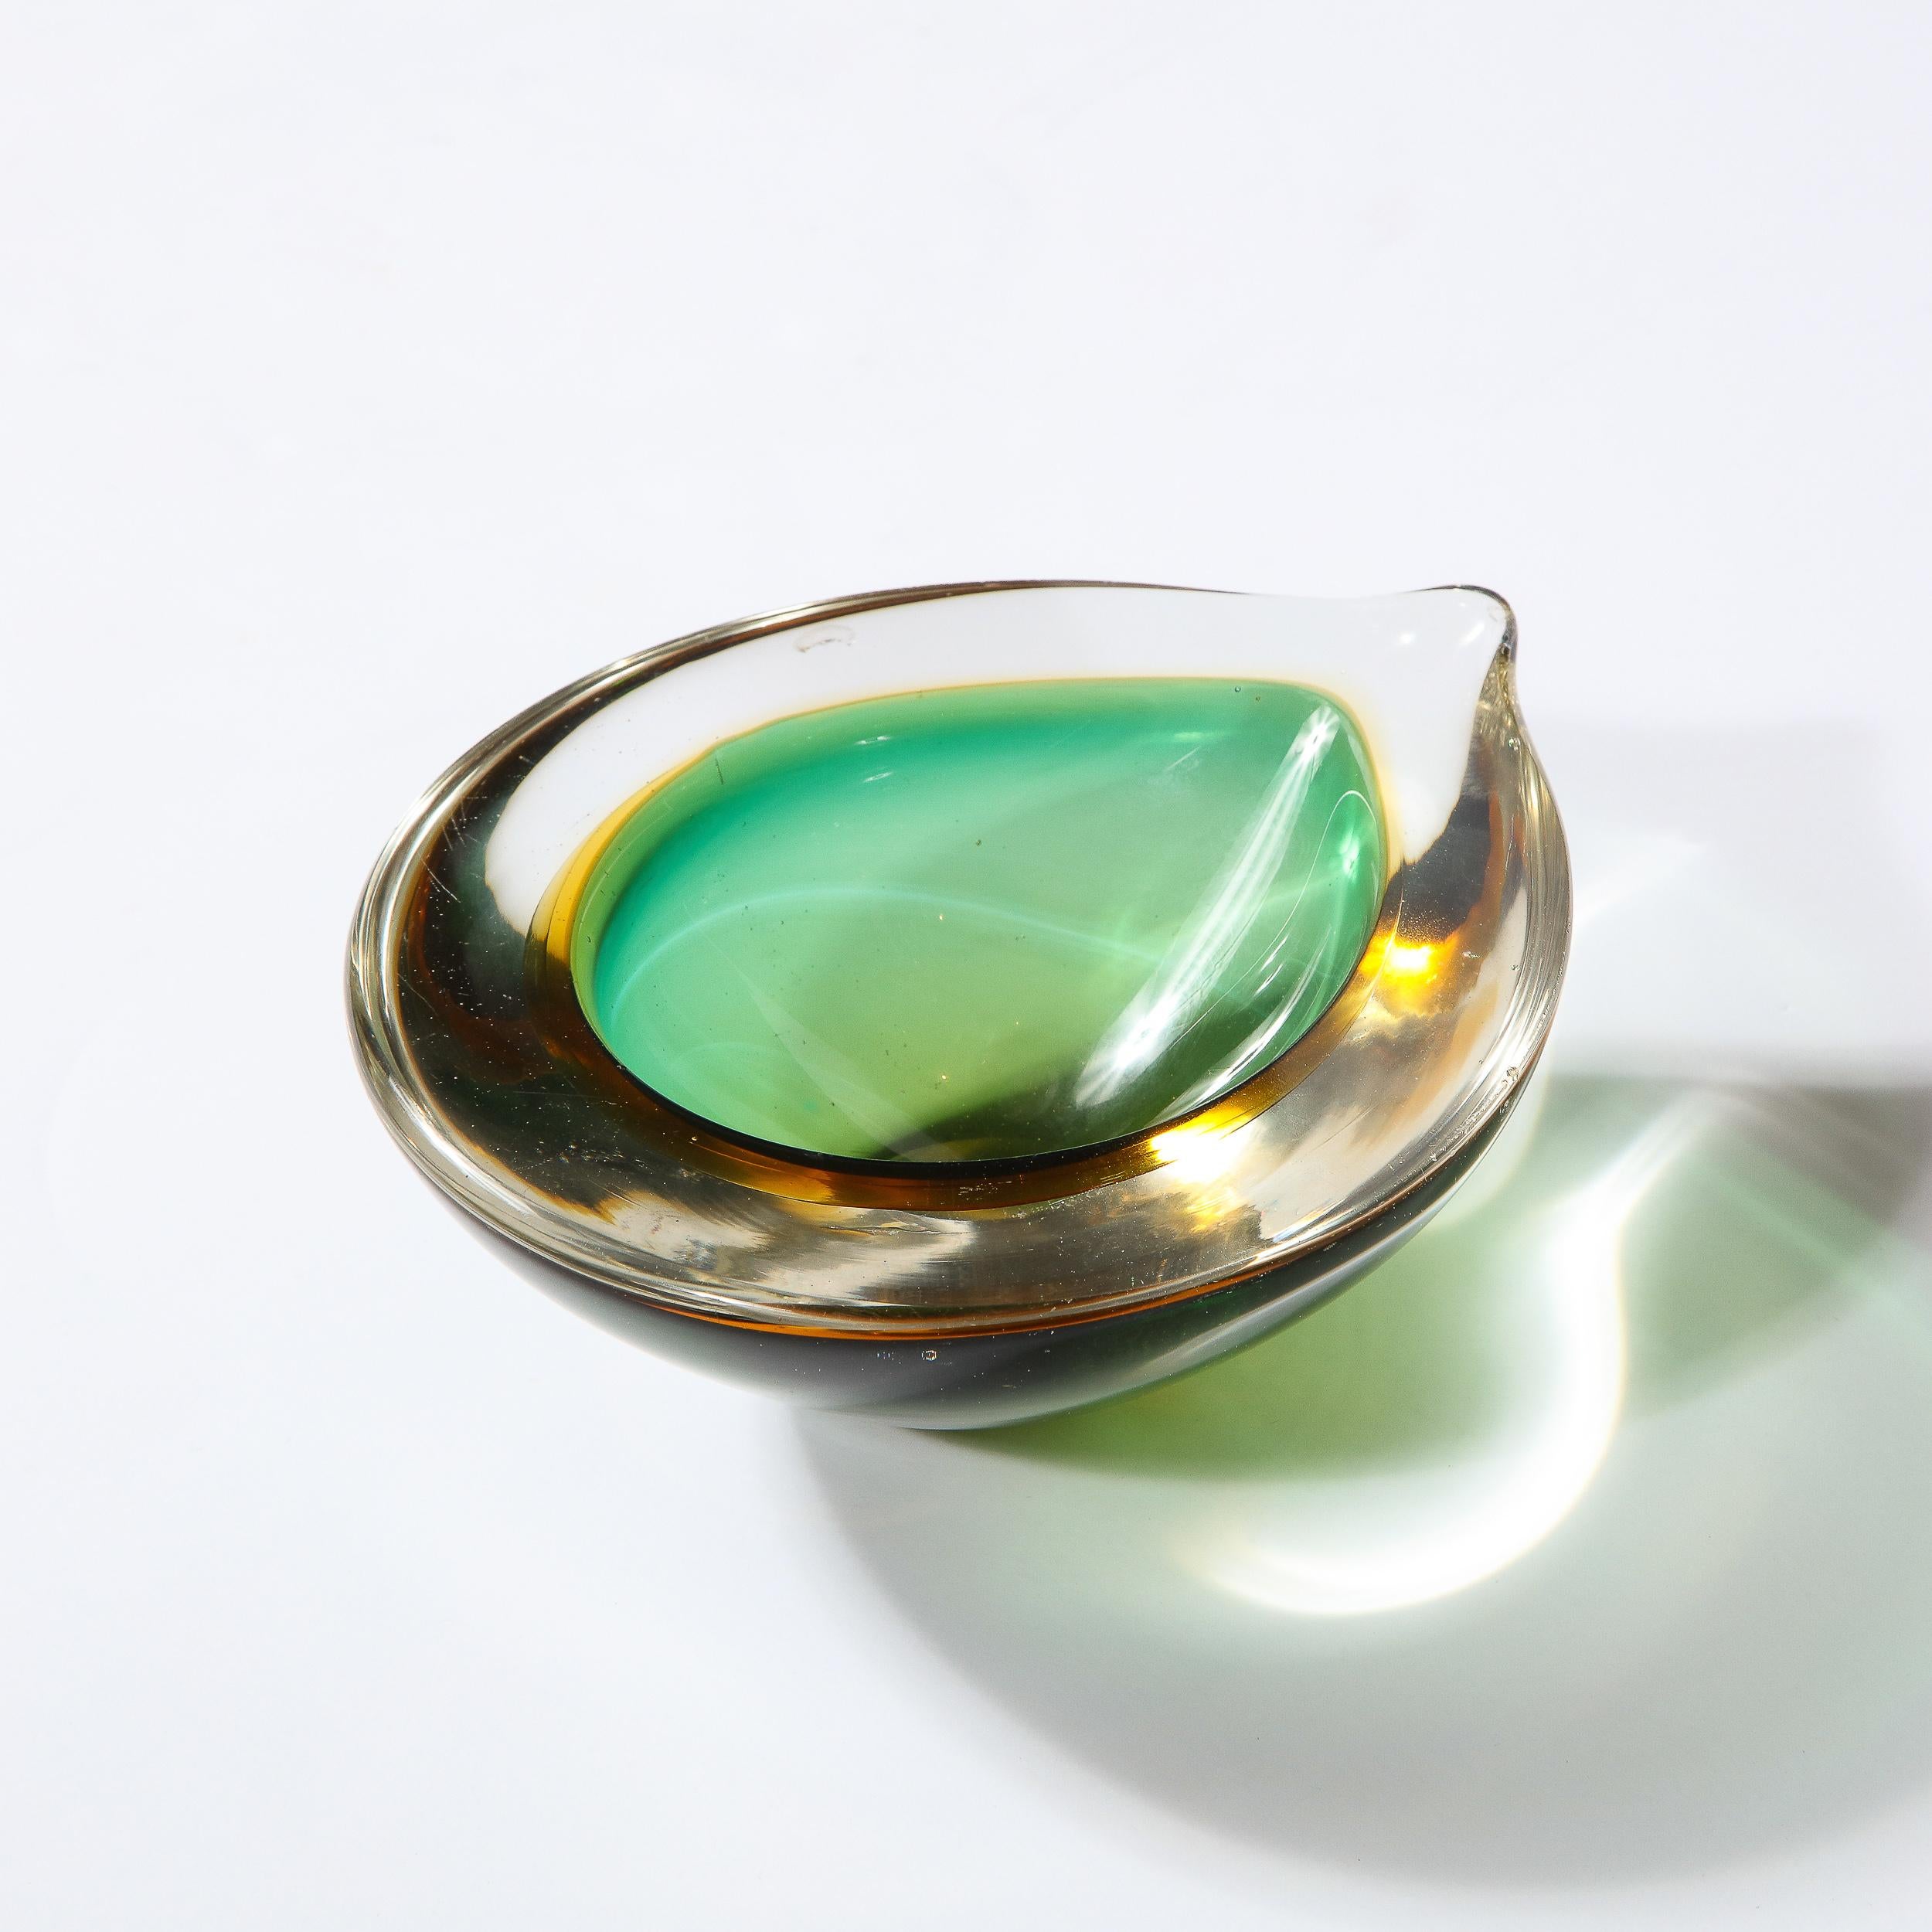 This stunning Mid-Century Modern bowl was realized in Murano, Italy- the island off the coast of Venice renowned for centuries for its superlative glass production. It features an ovoid teardrop form with an emerald interior and a translucent